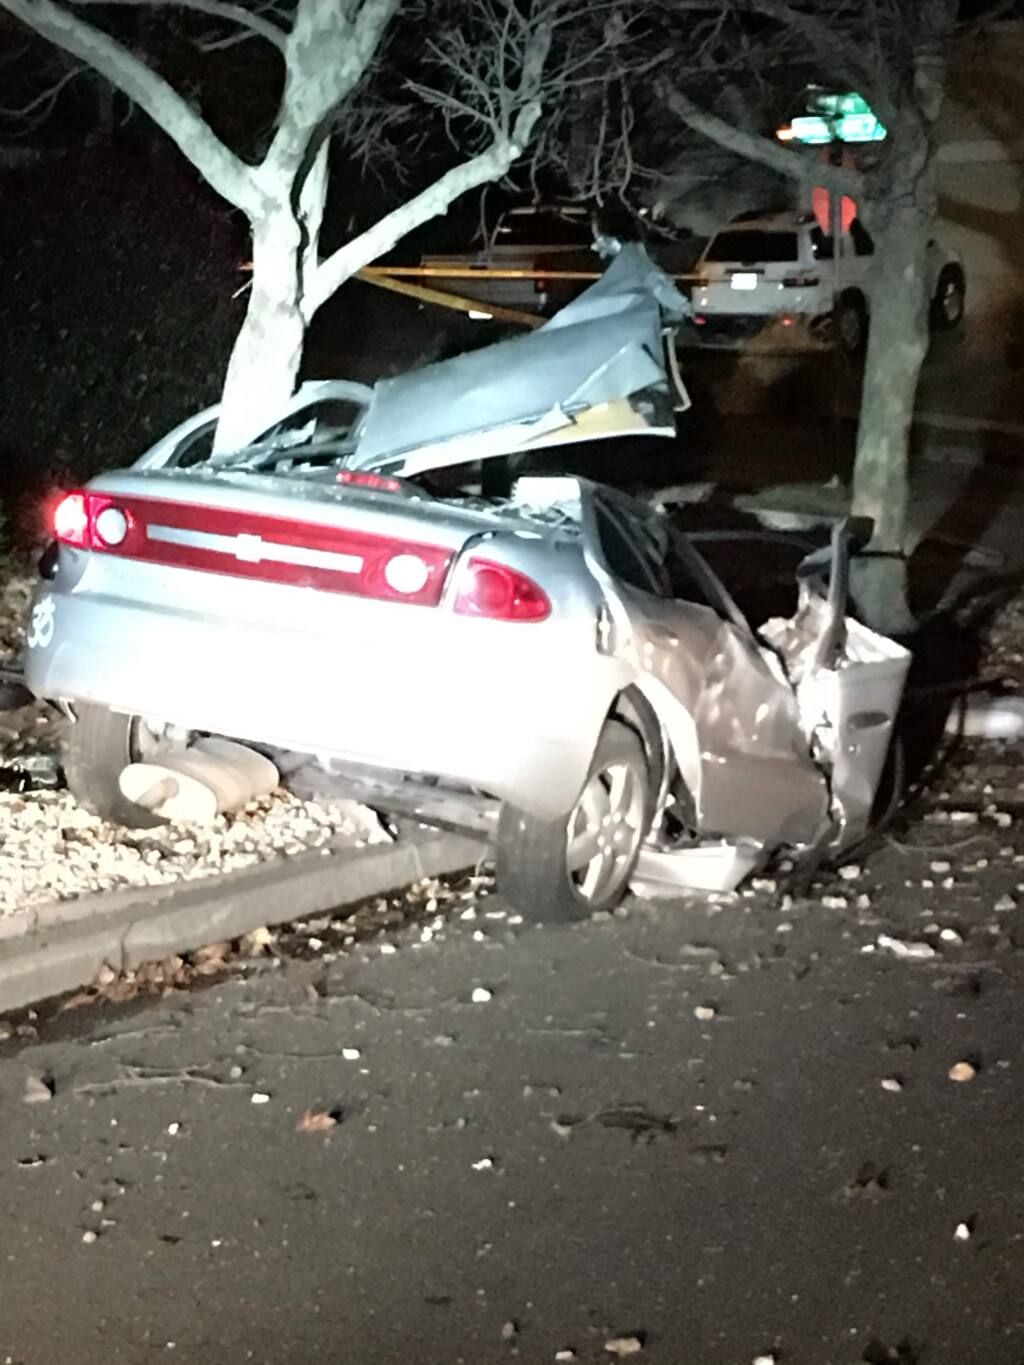 An 18-year-old woman was killed and the driver arrested after a suspected DUI crash in east Santa Rosa on Sunday, Jan. 1, 2017. (COURTESY OF SANTA ROSA POLICE DEPARTMENT)